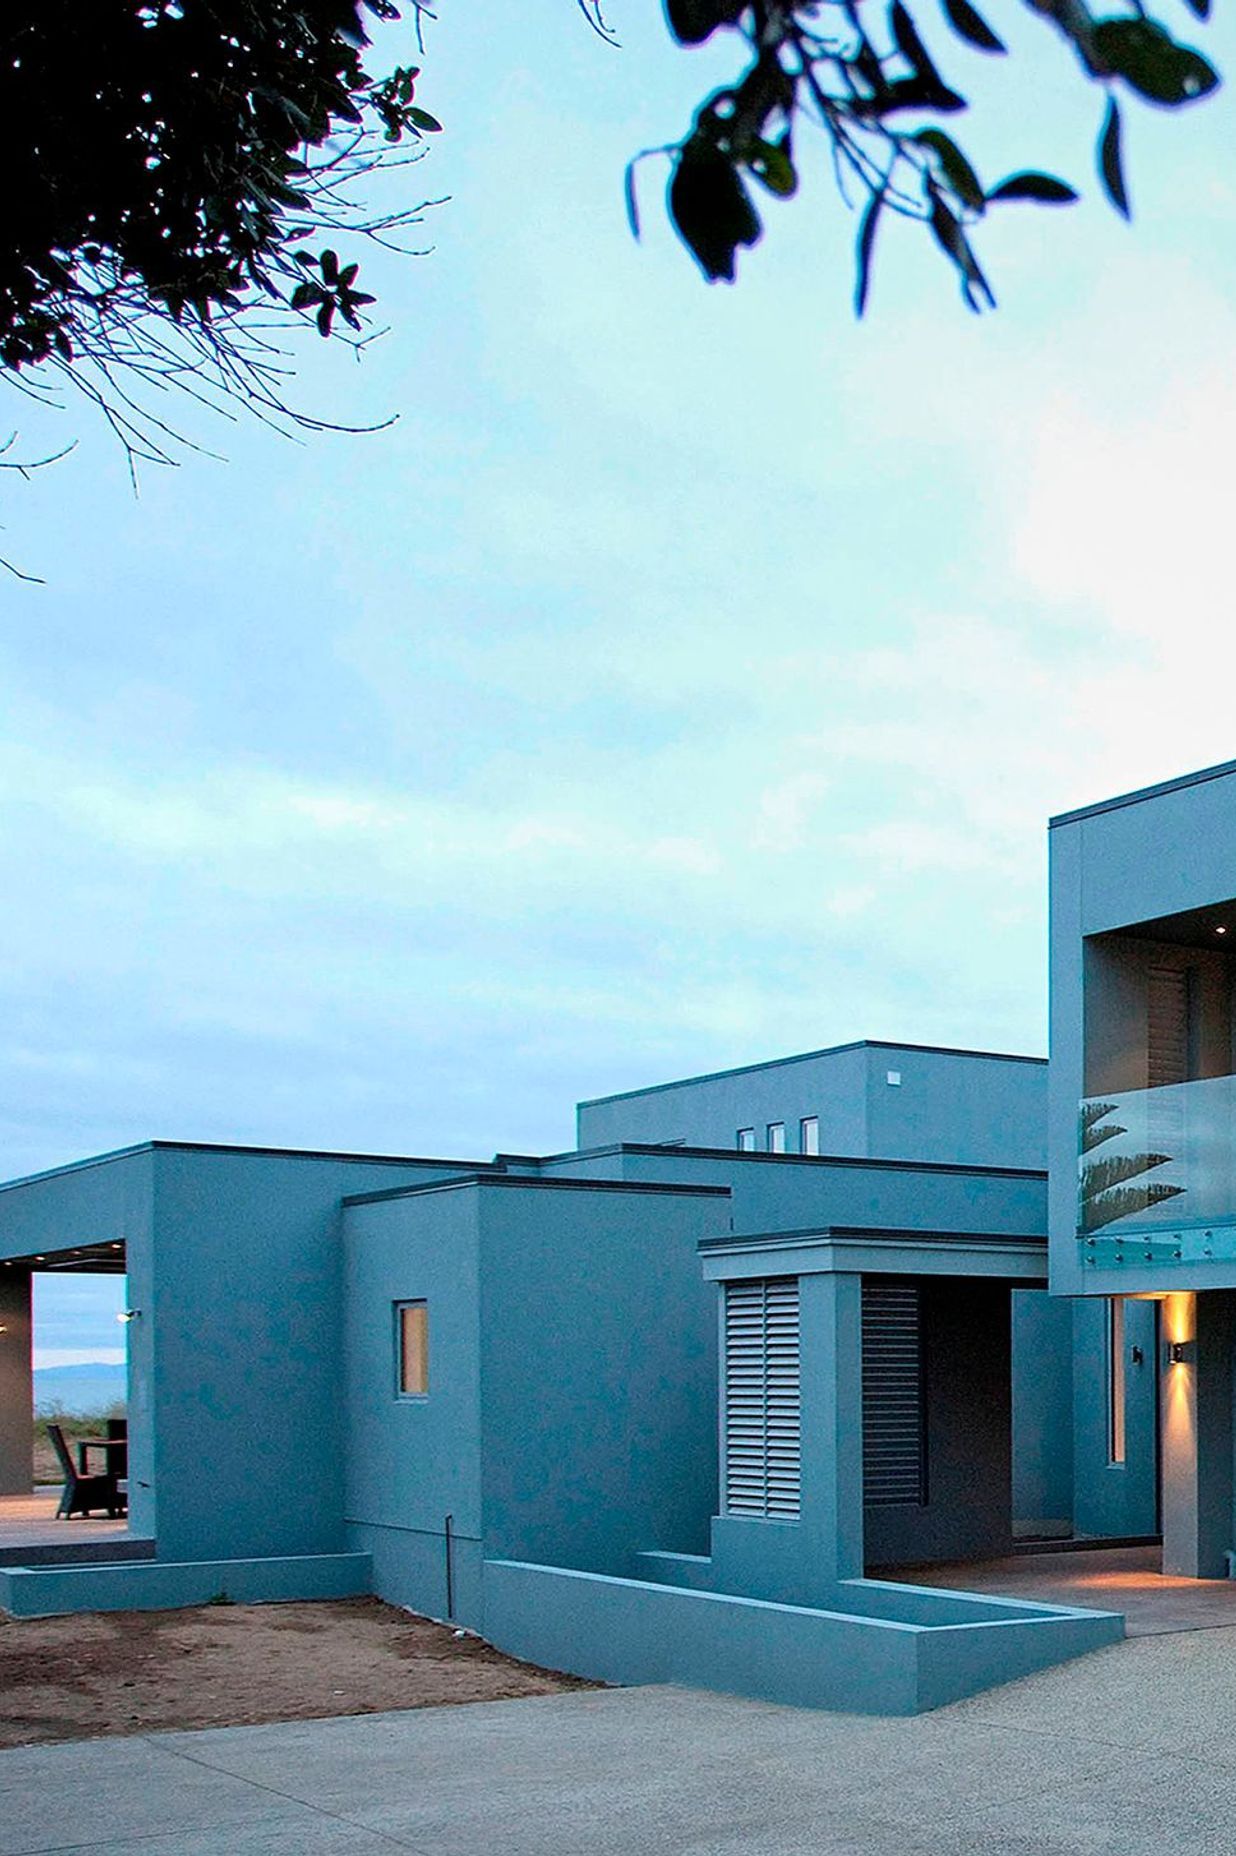 Soft eggshell blue blends this Orewa home into the sky and seascape.